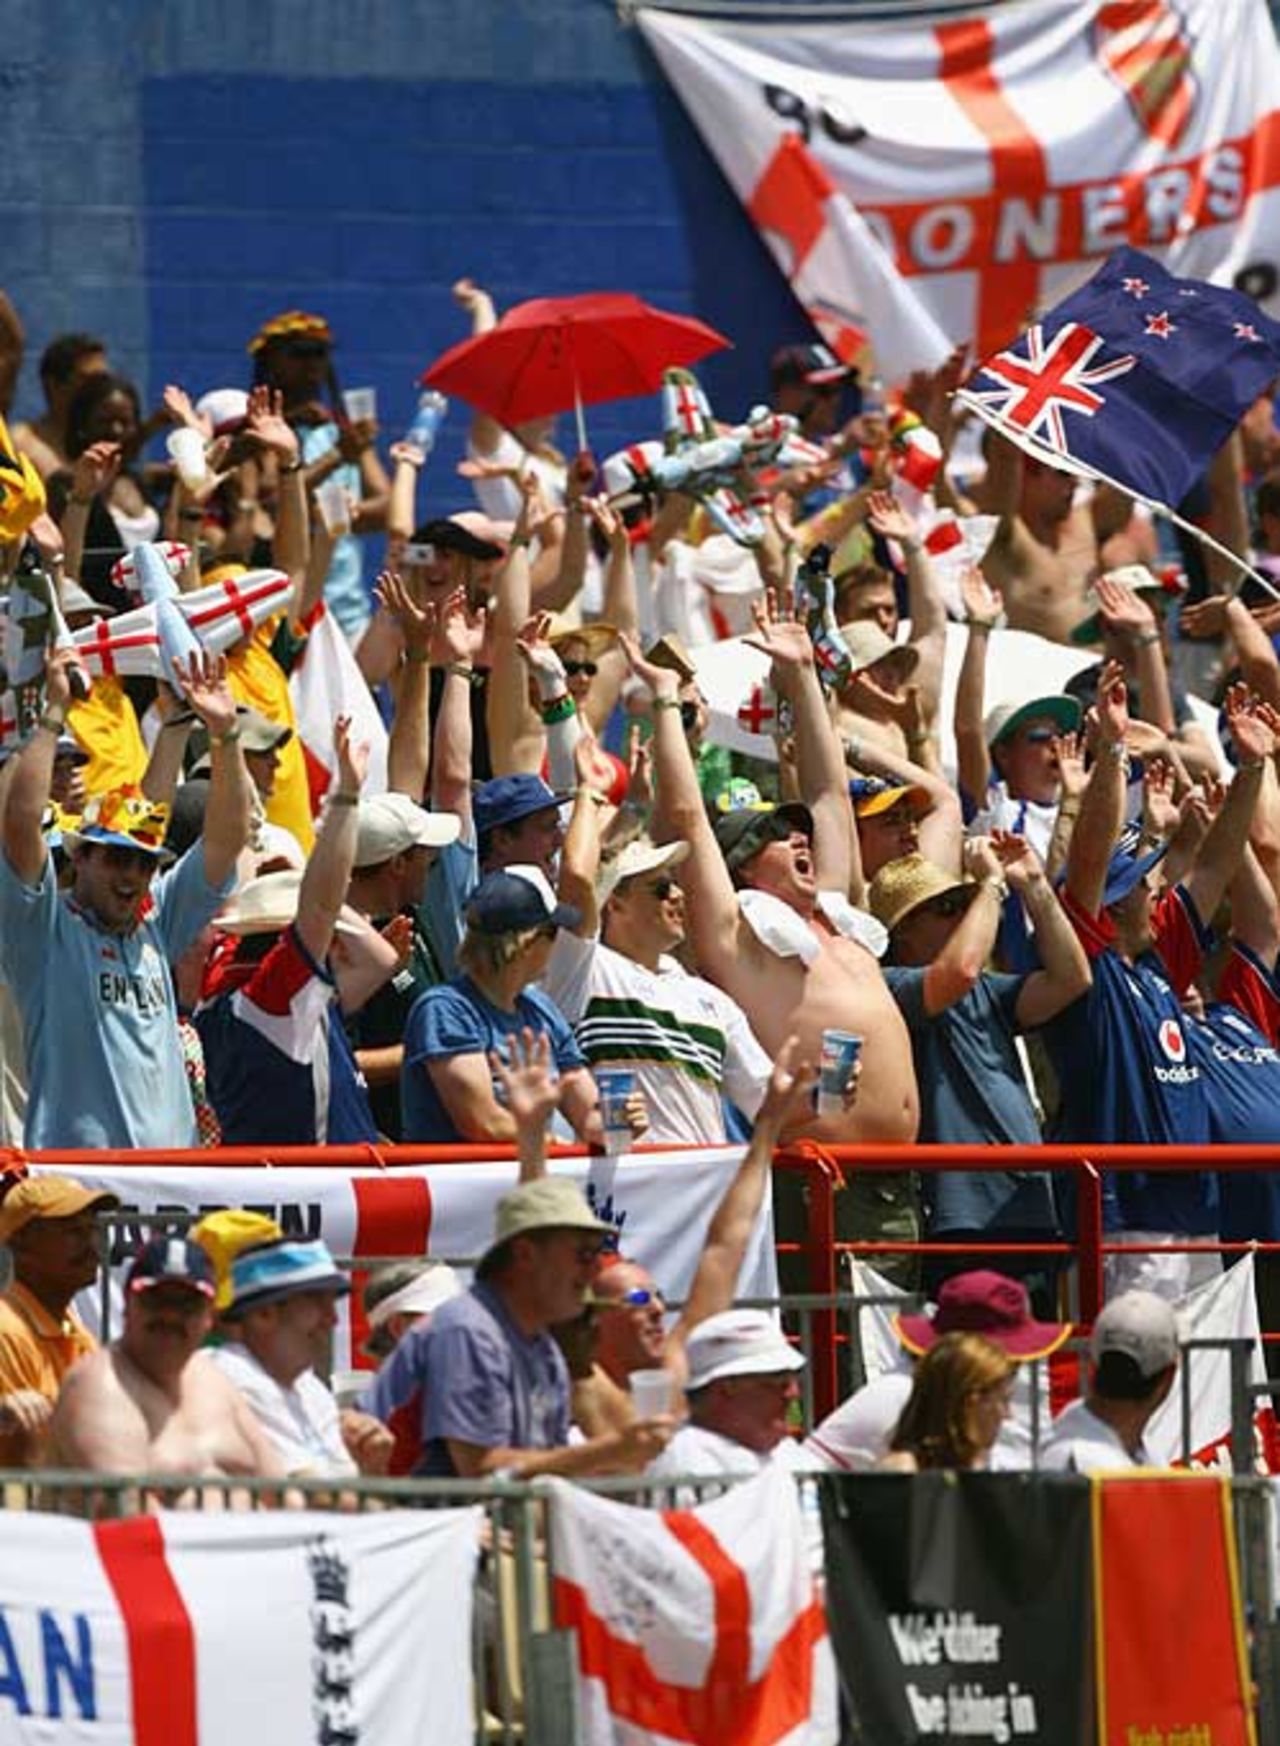 The Barmy Army were out in force in St Lucia, England v New Zealand, Group C, Gros Islet, March 16, 2007